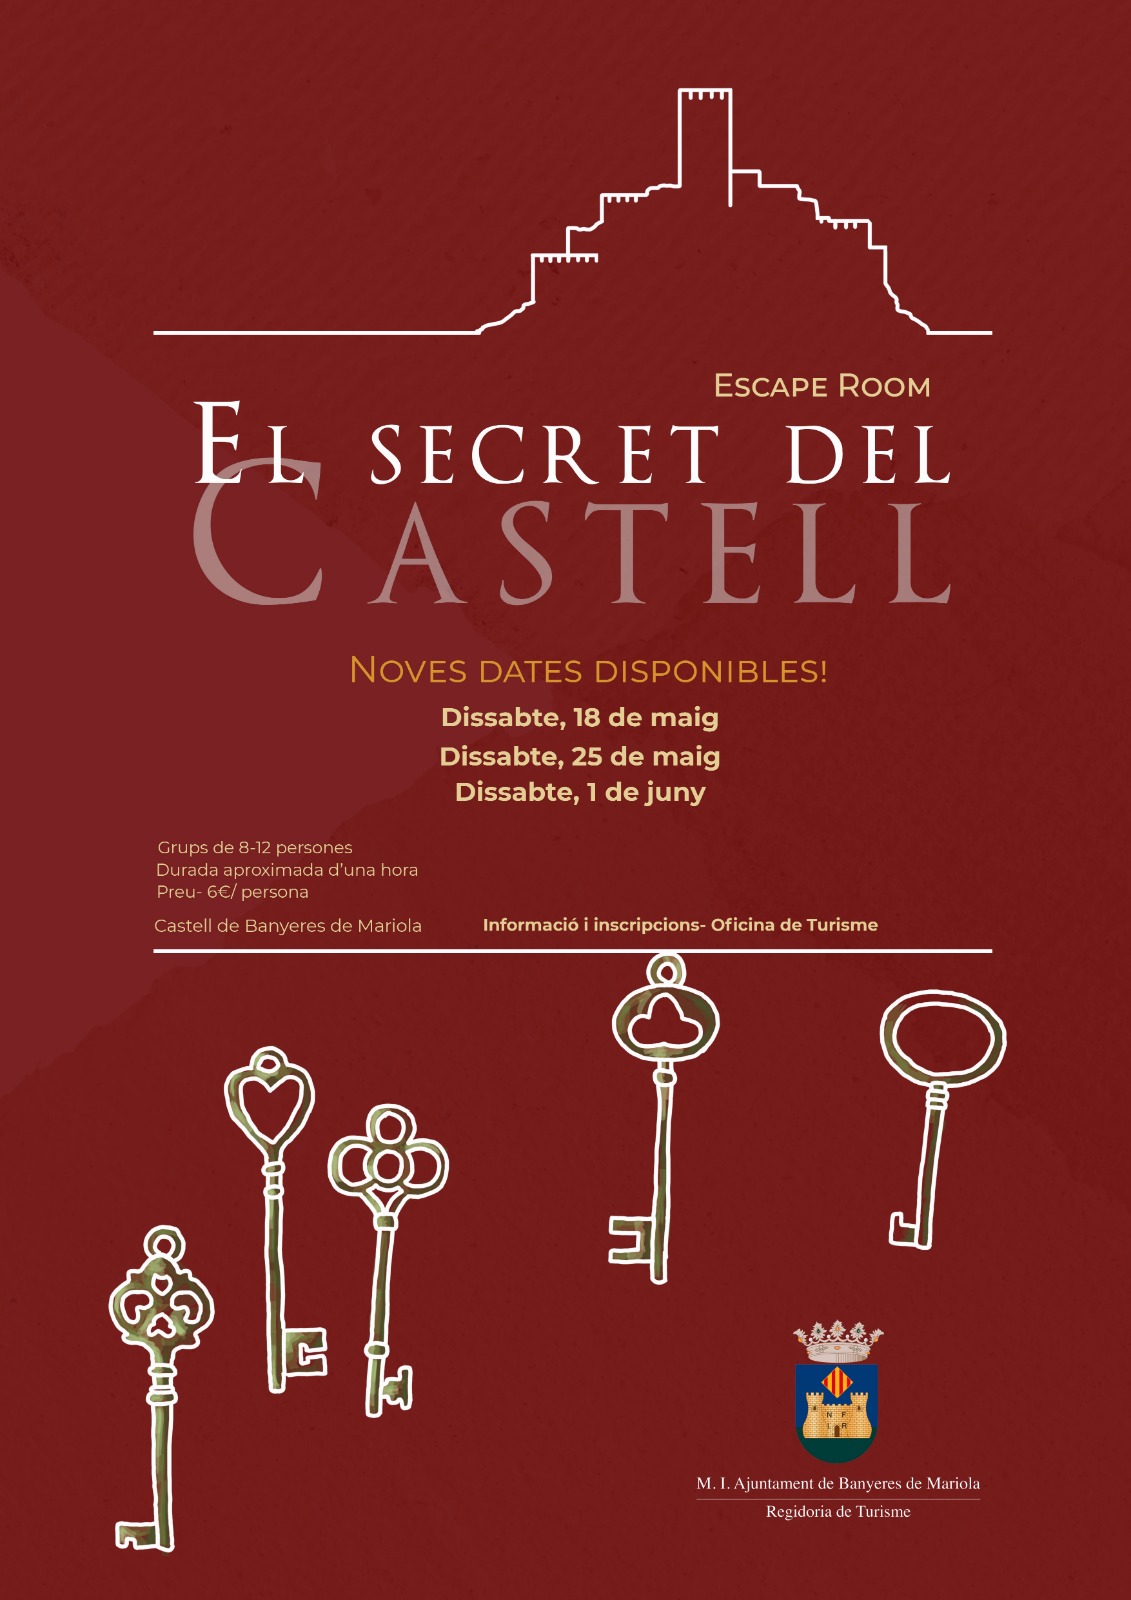 Escape room castell banyeres